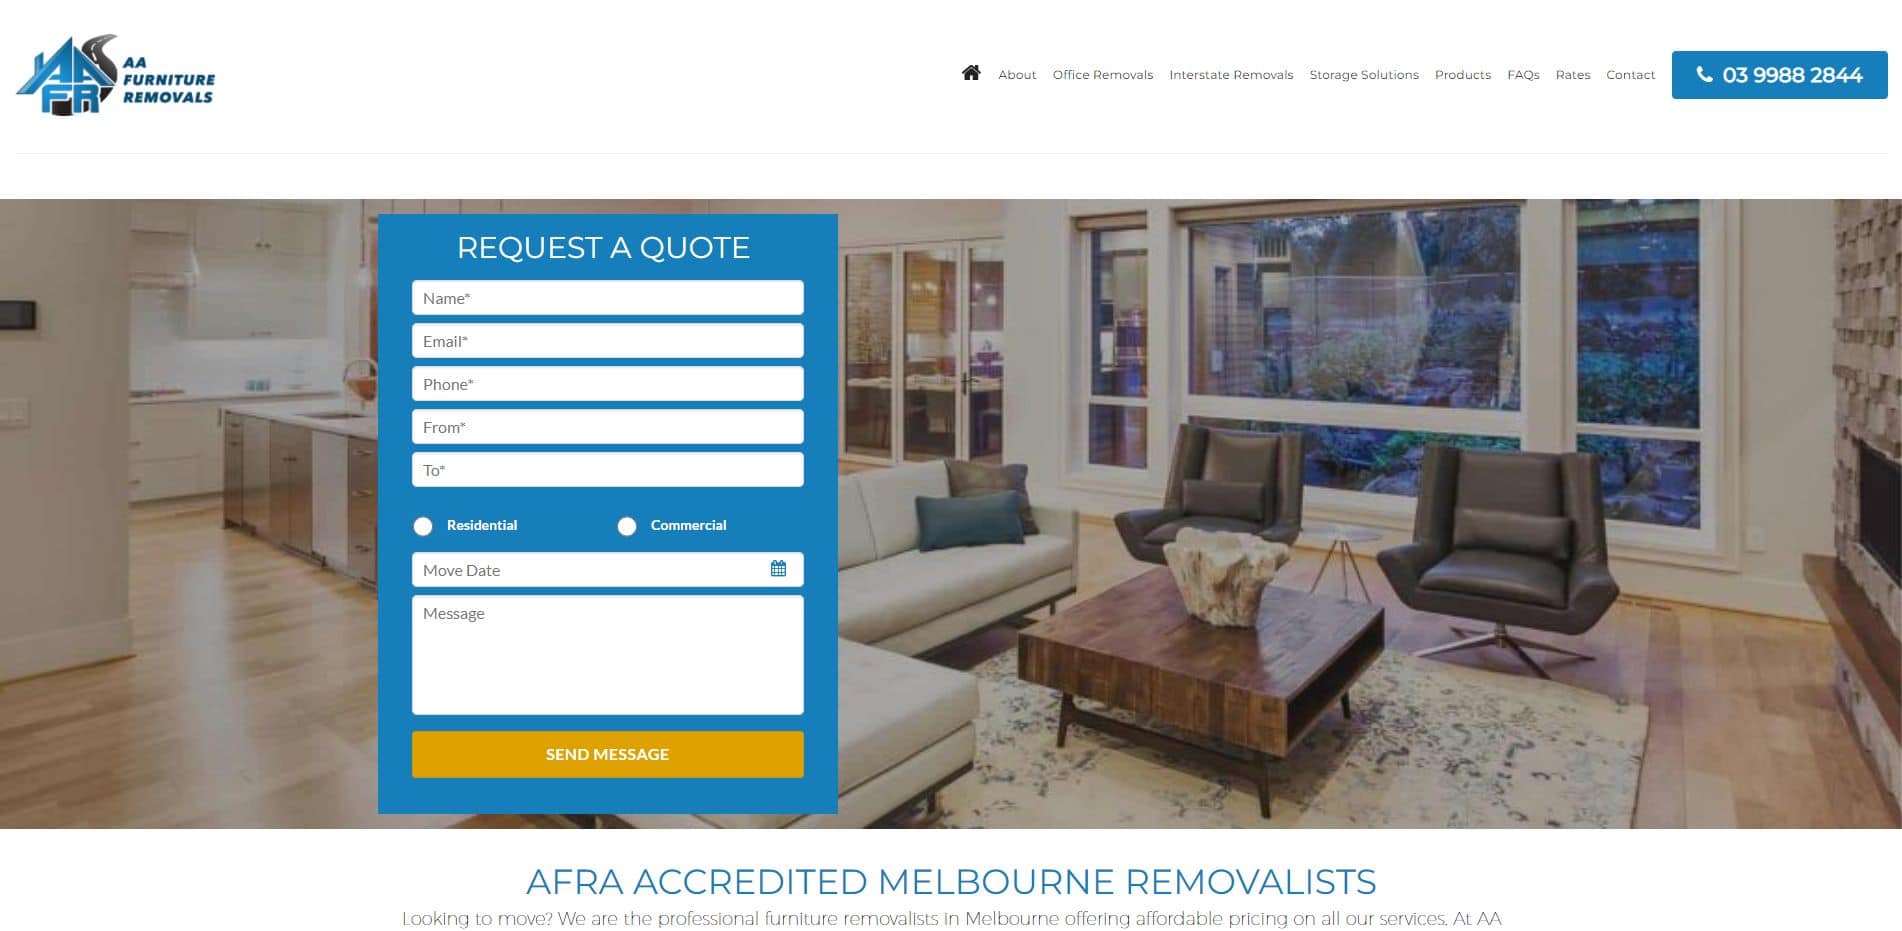 aa furniture removals